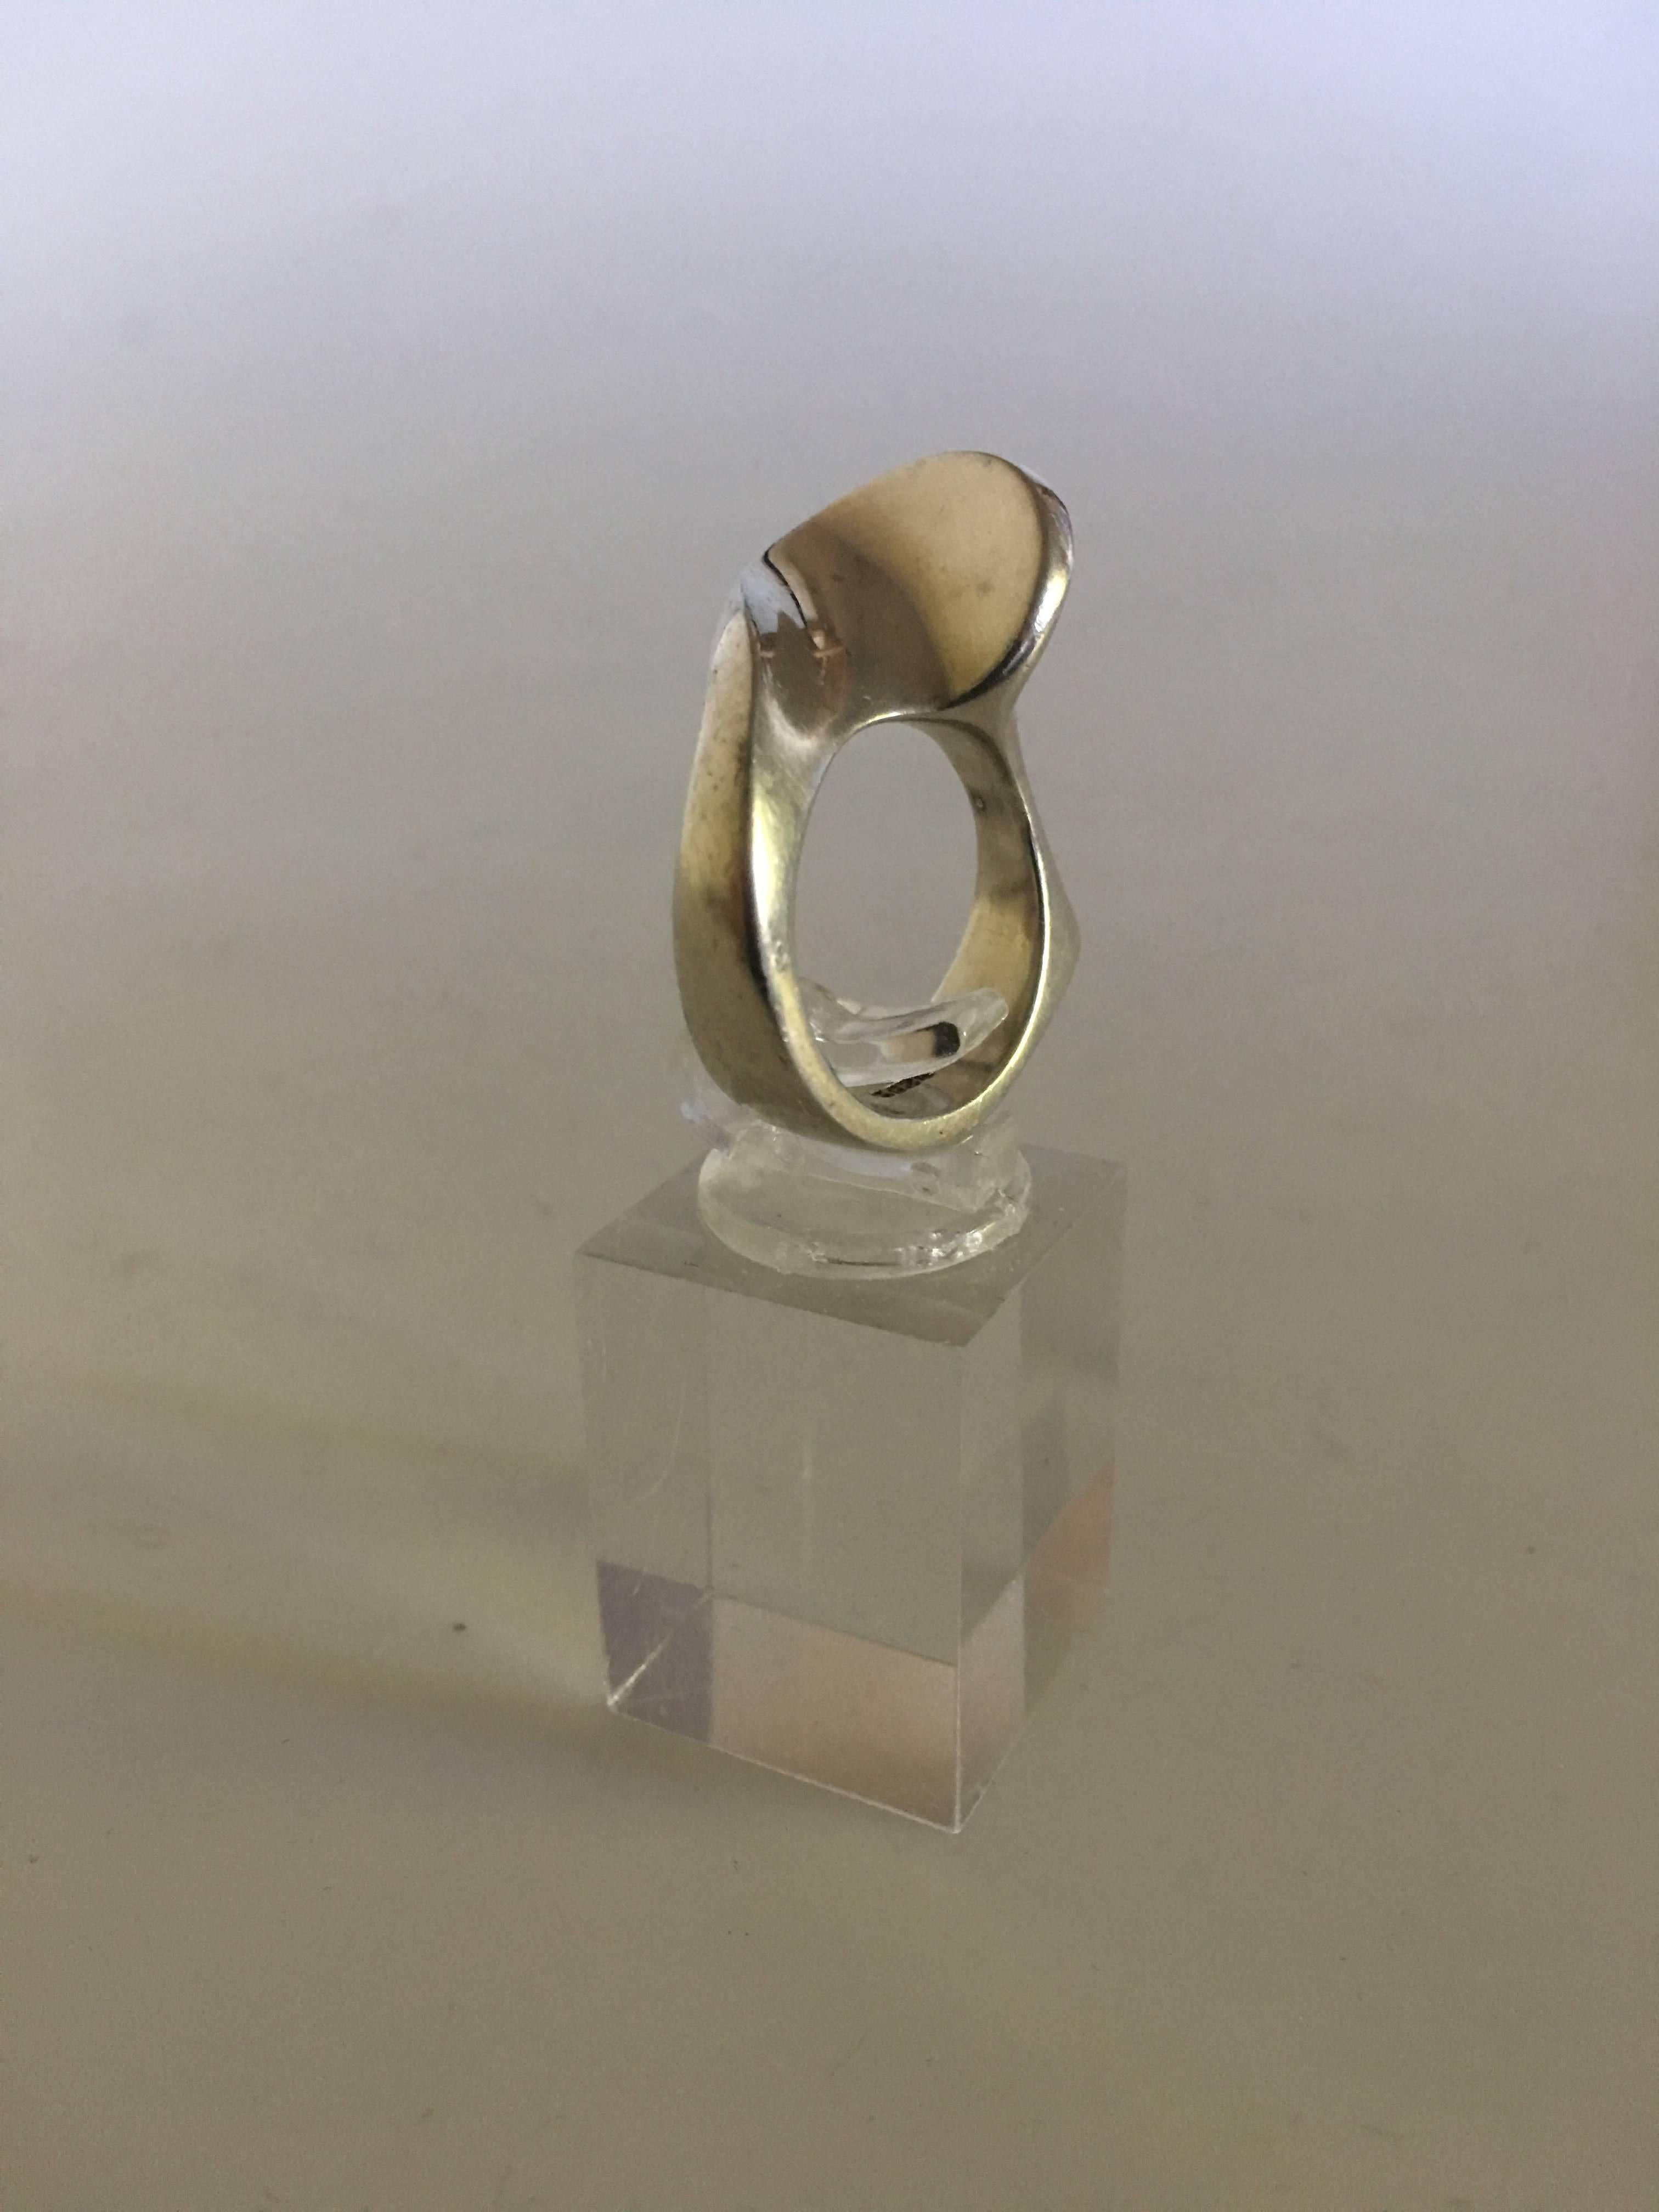 Hans Hansen Sterling Silver Ring. Size 52 (Us size 6). Weighs 14 grams.